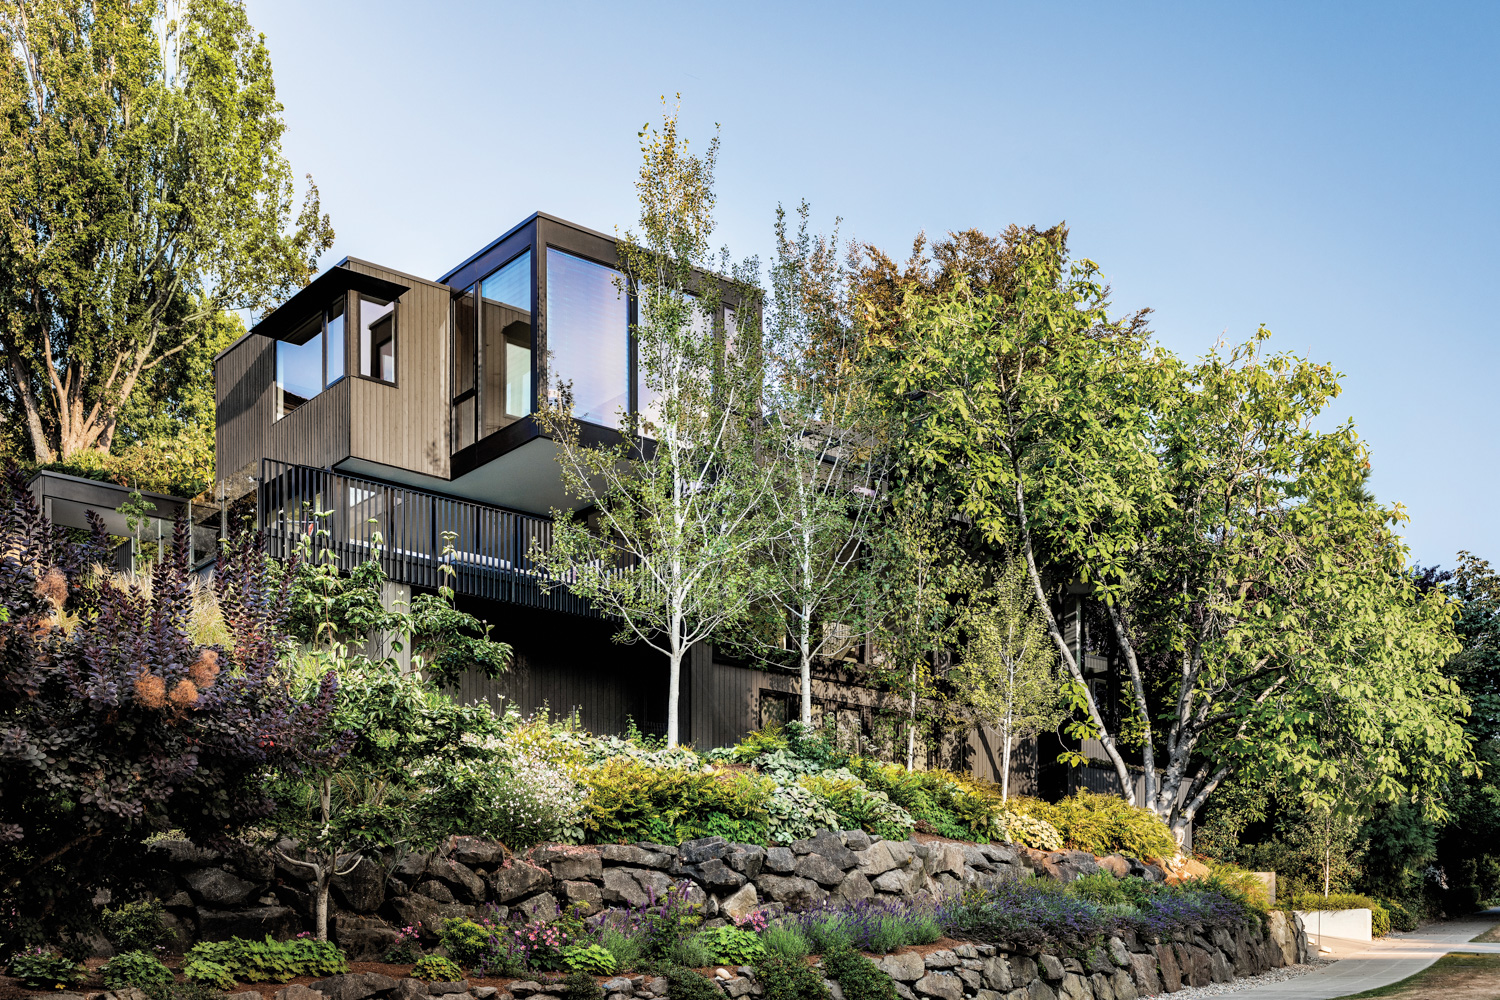 rectilinear exterior of a stacked and stepped modern style hillside home tucked among trees